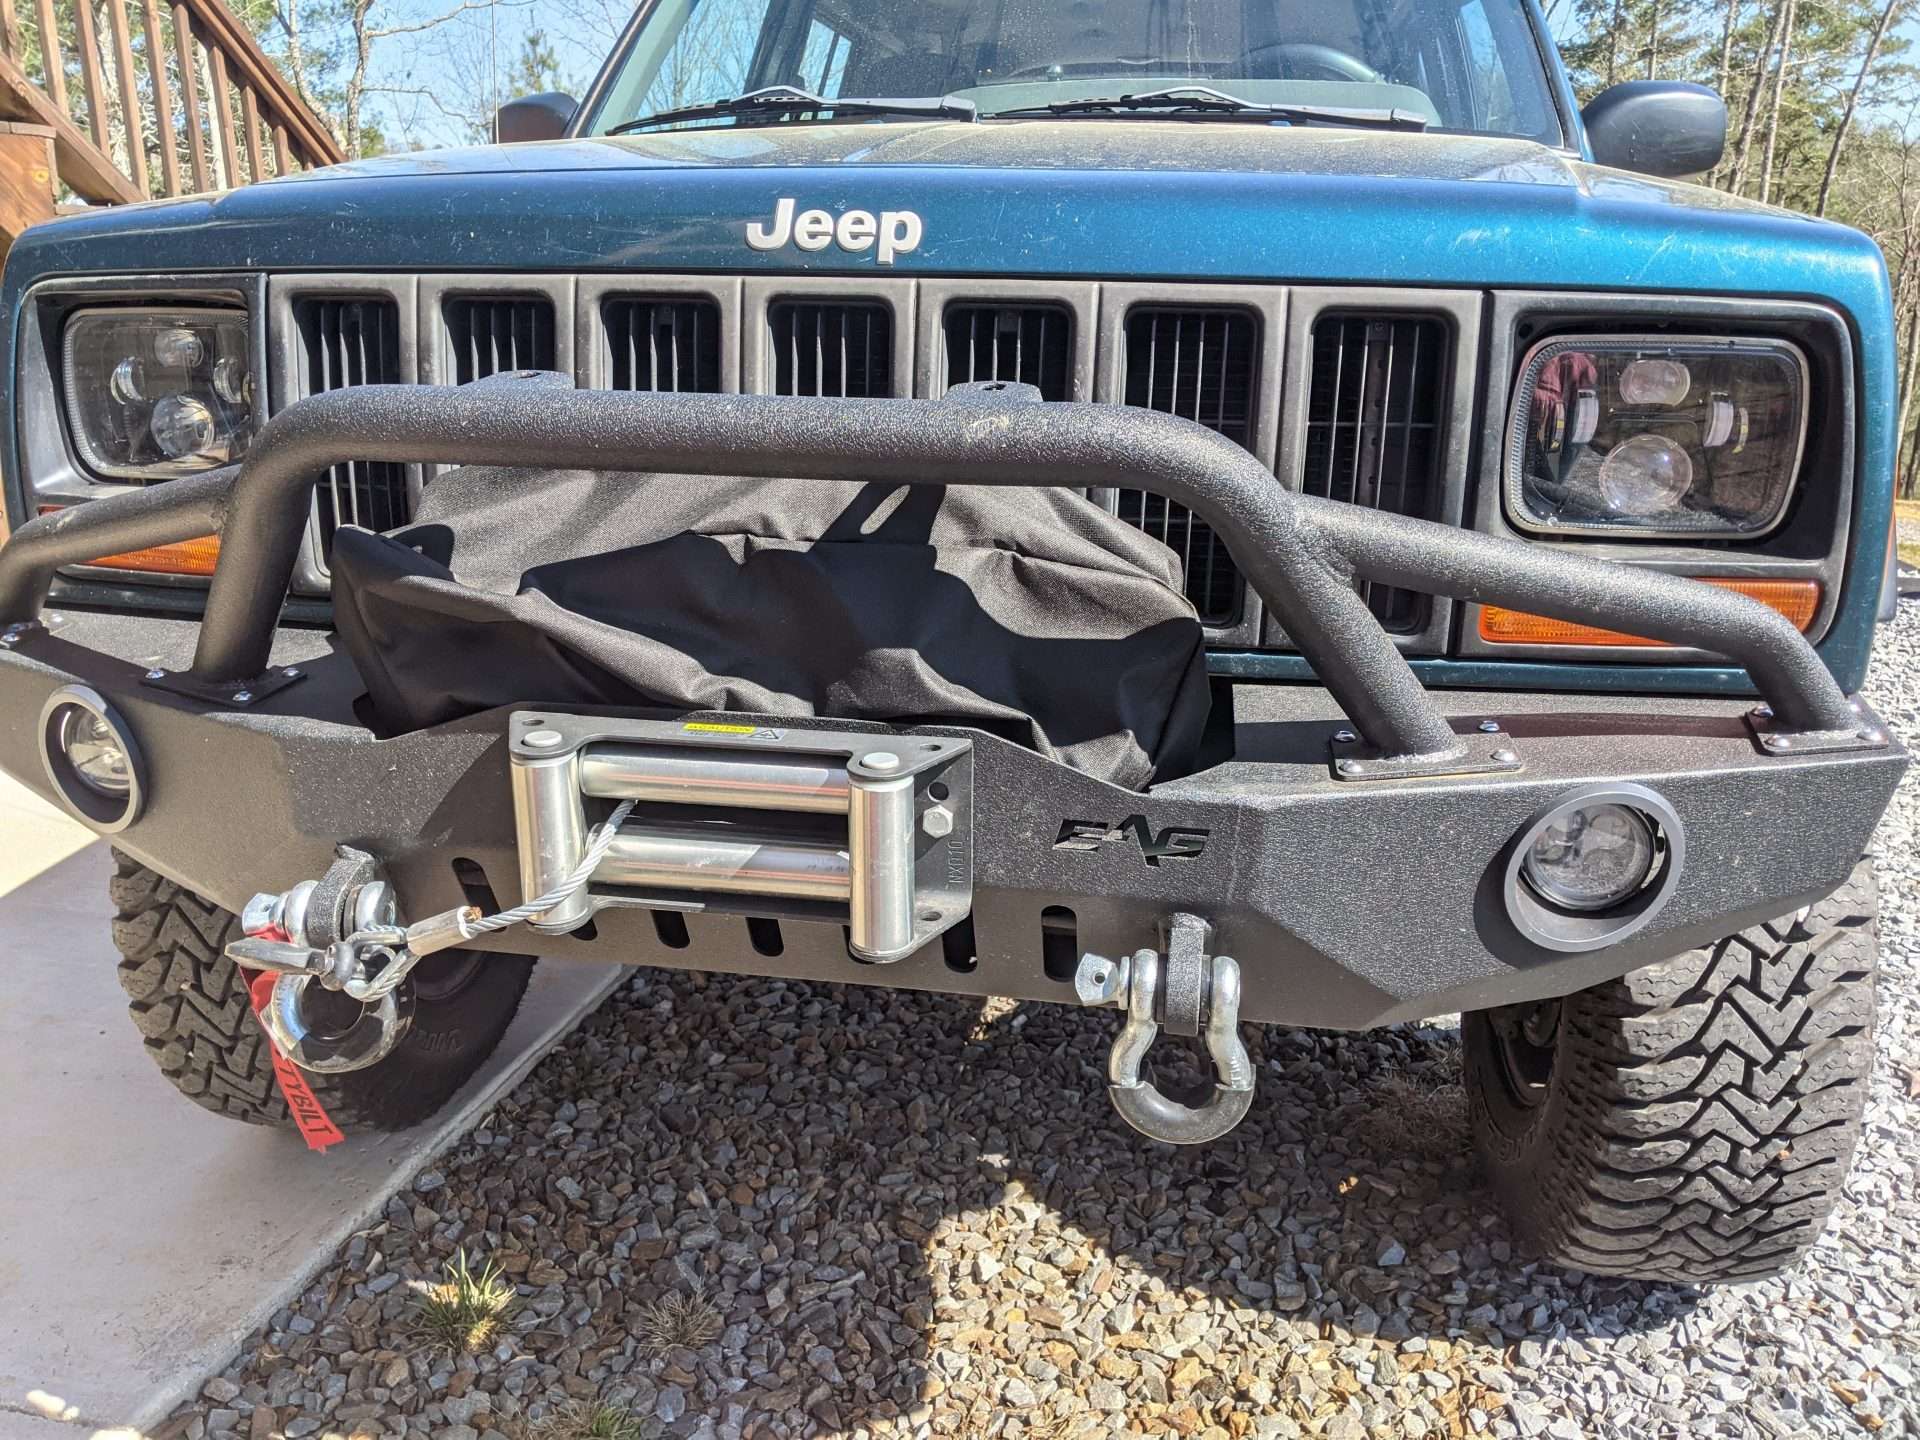 Jeep Cherokee with winch on bumper